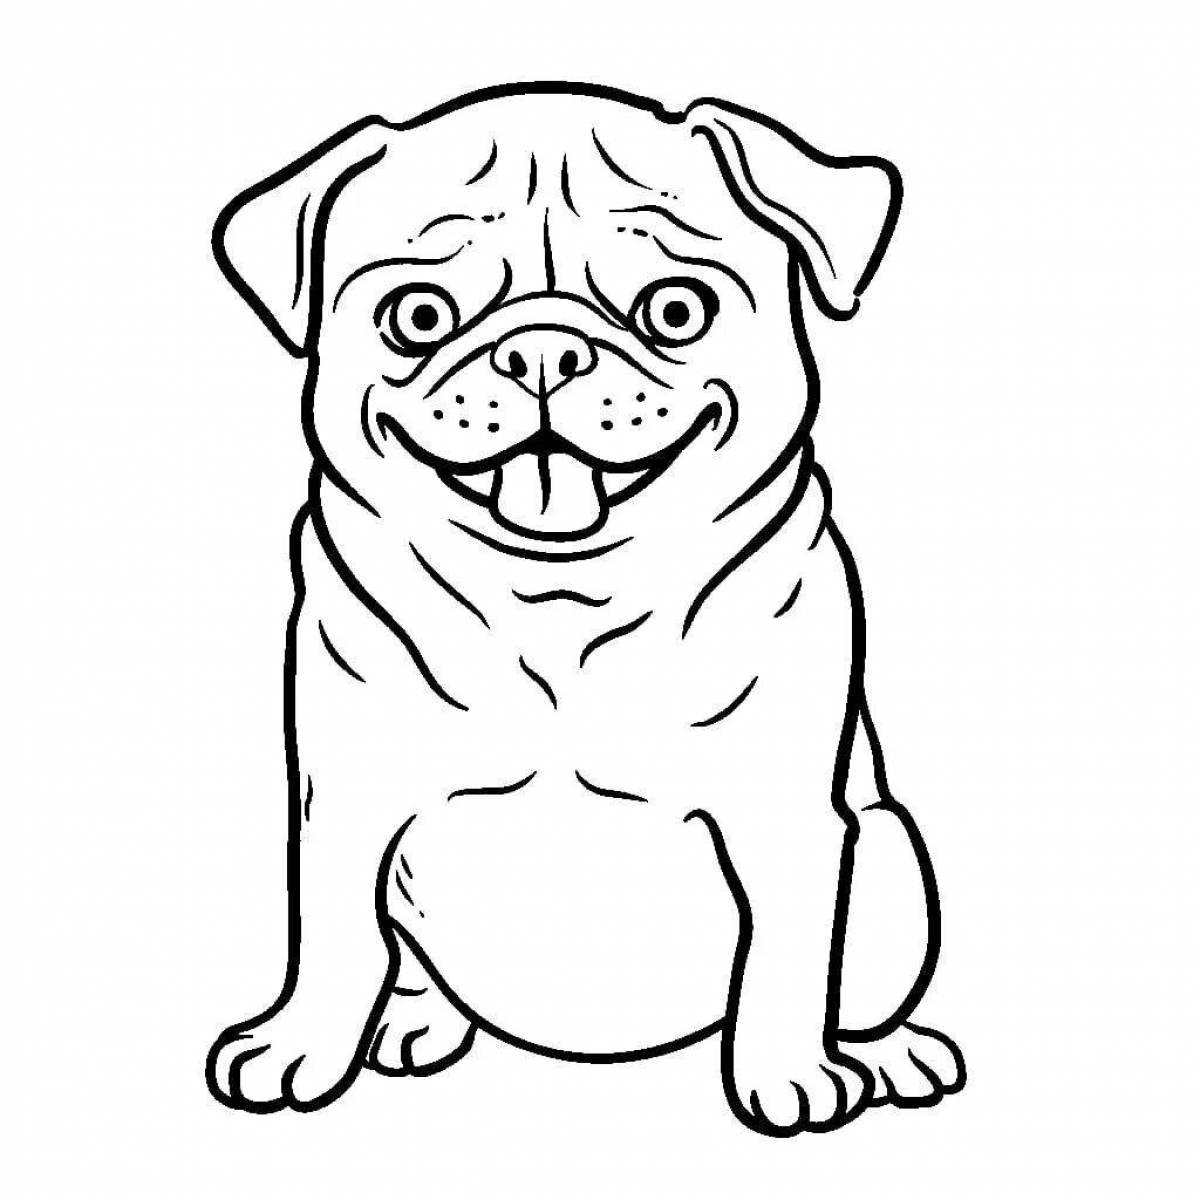 Coloring page funny pug